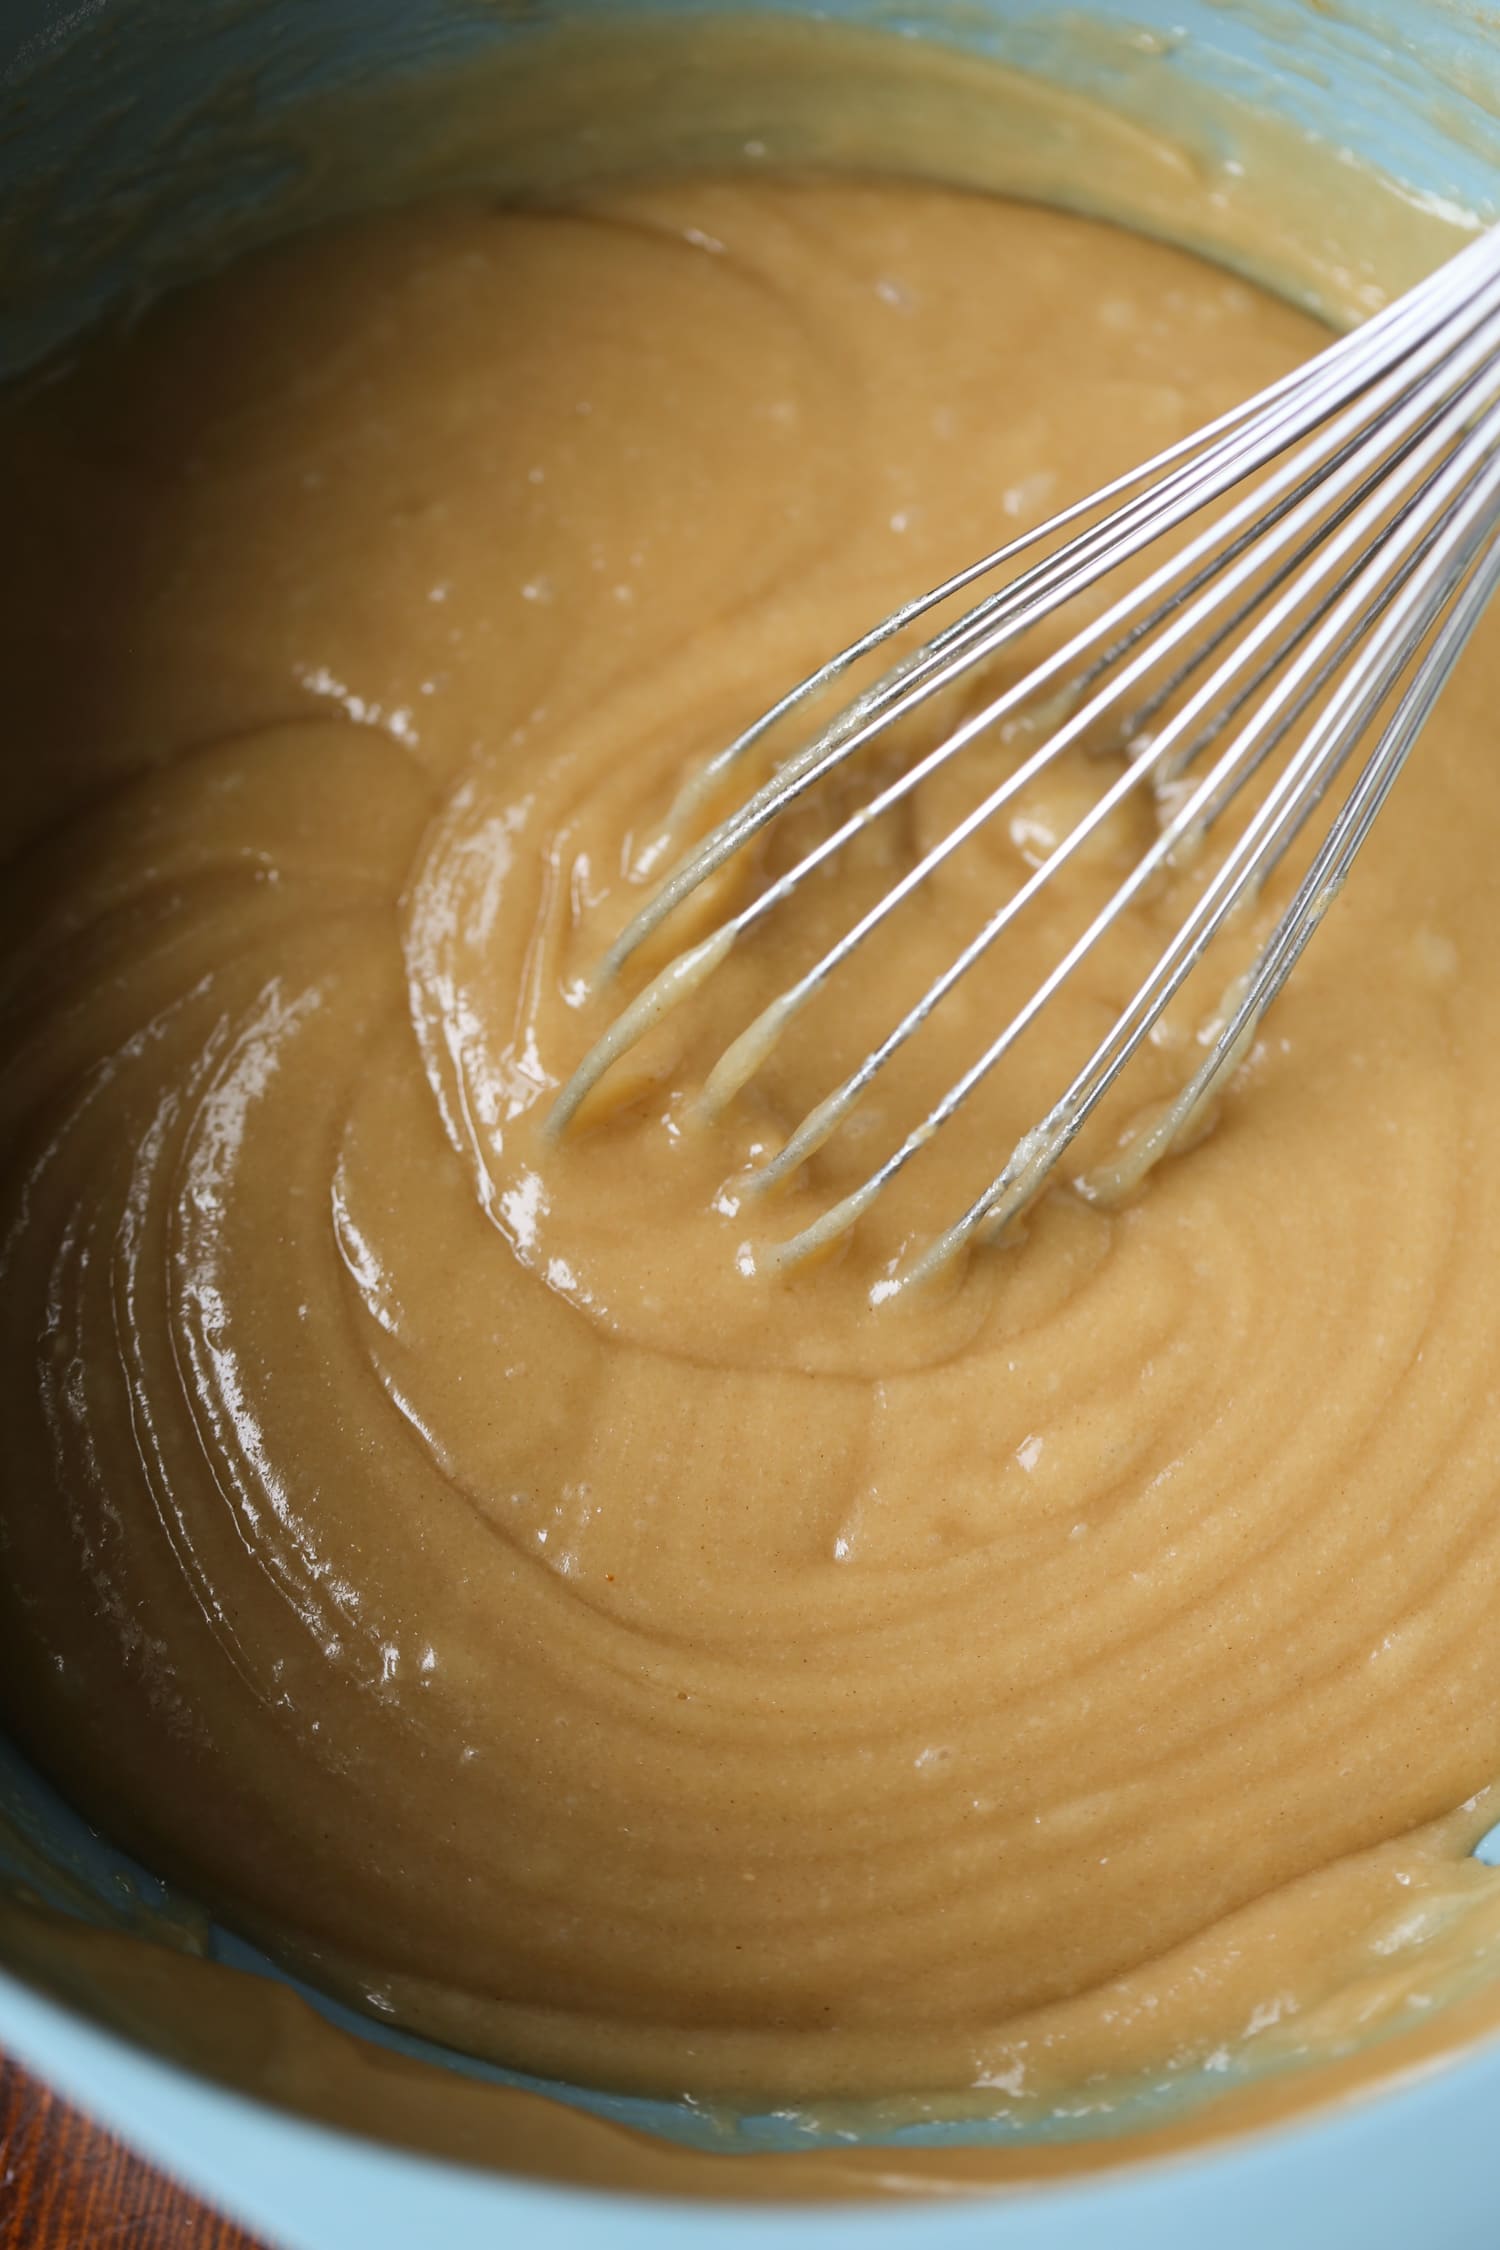 Peanut butter cake batter being whisked.